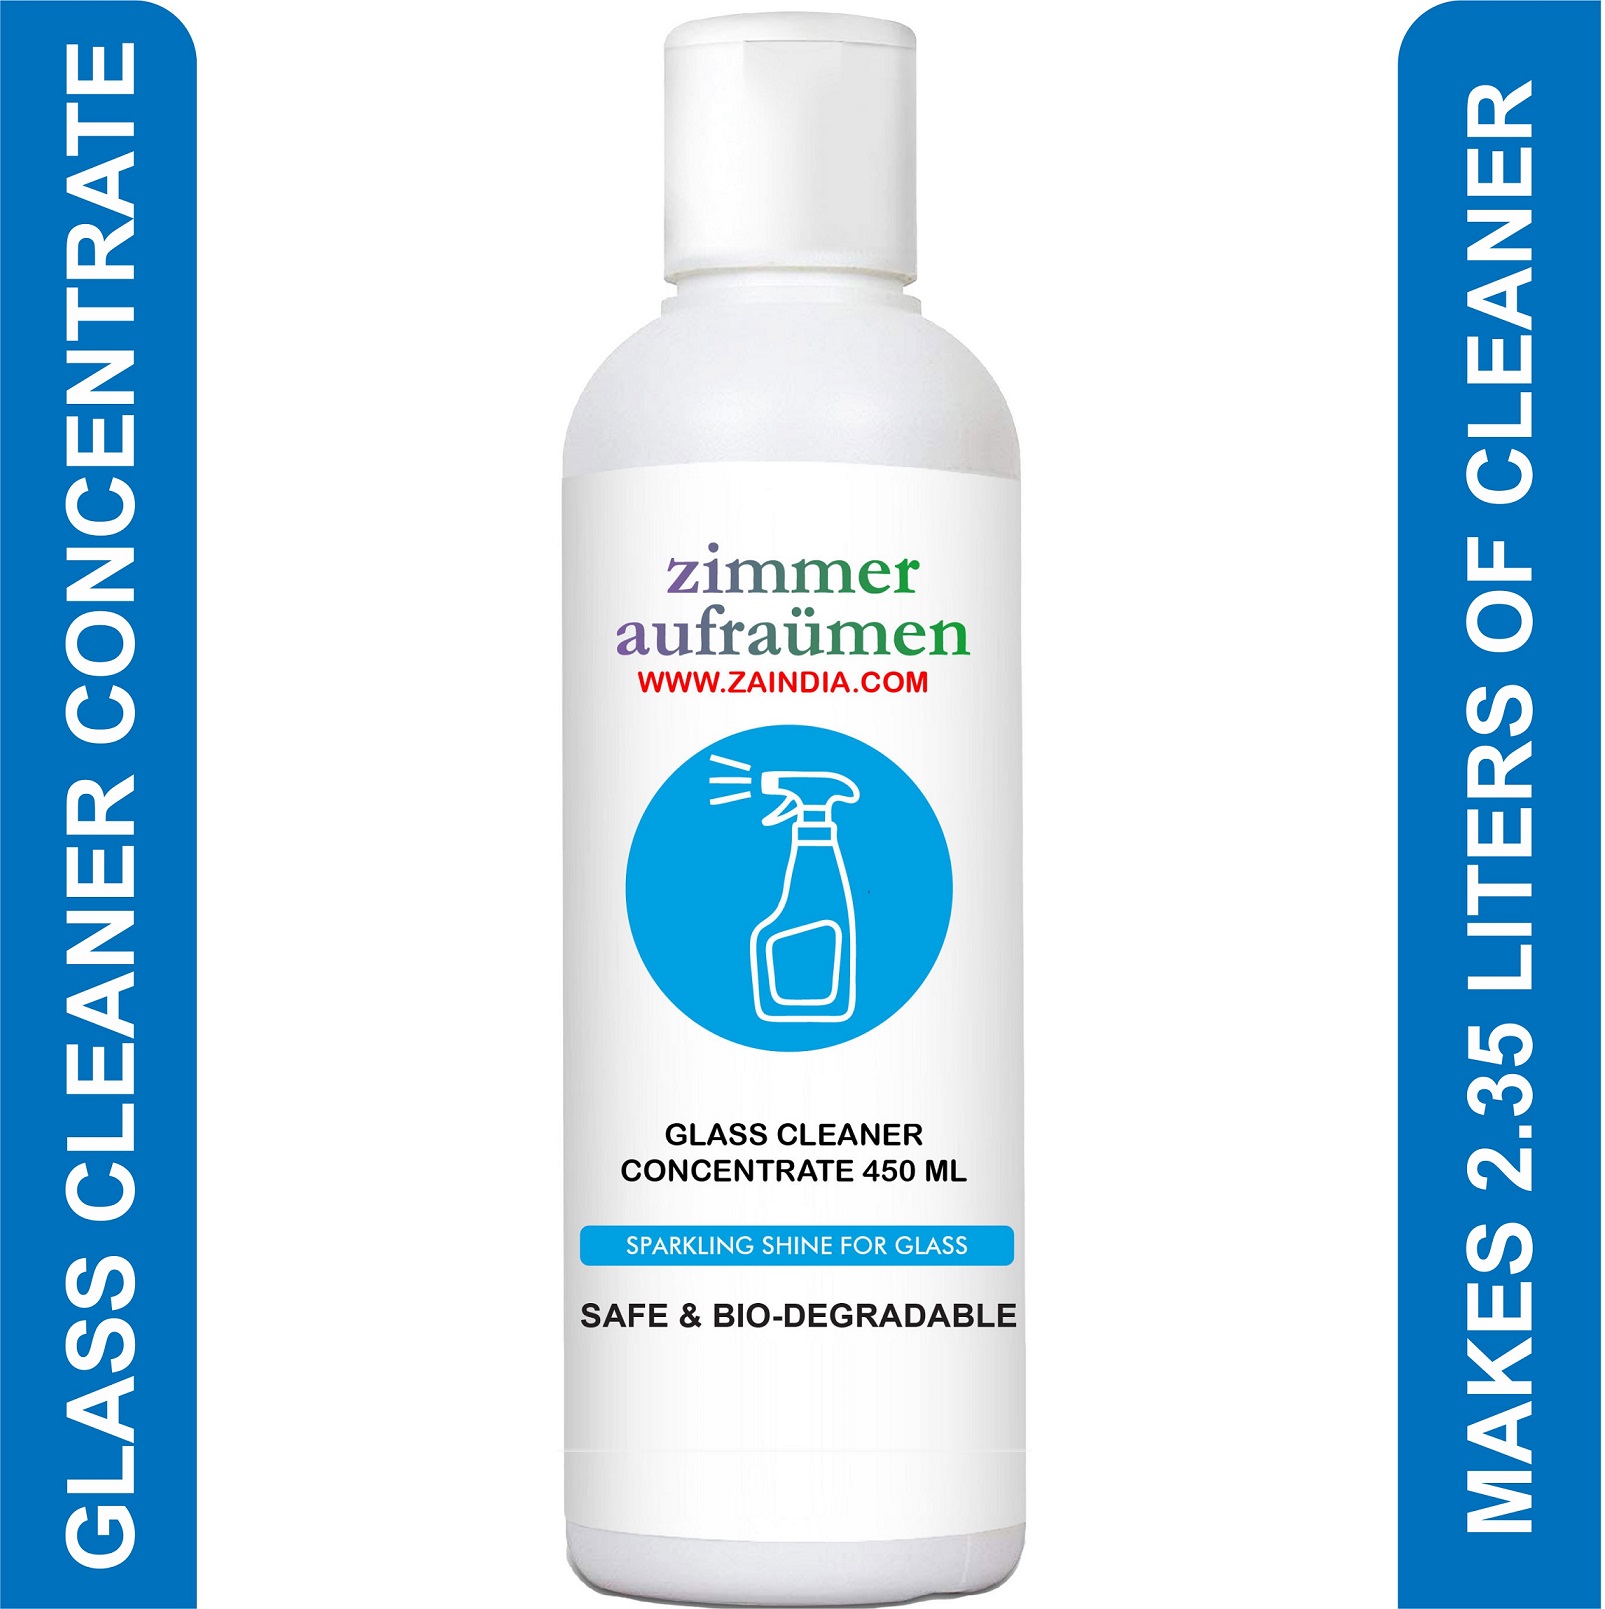 zimmer-aufraumen-concentrated-glass-cleaner-liquid-450-ml-make-2l-of-glass-cleaner-solution